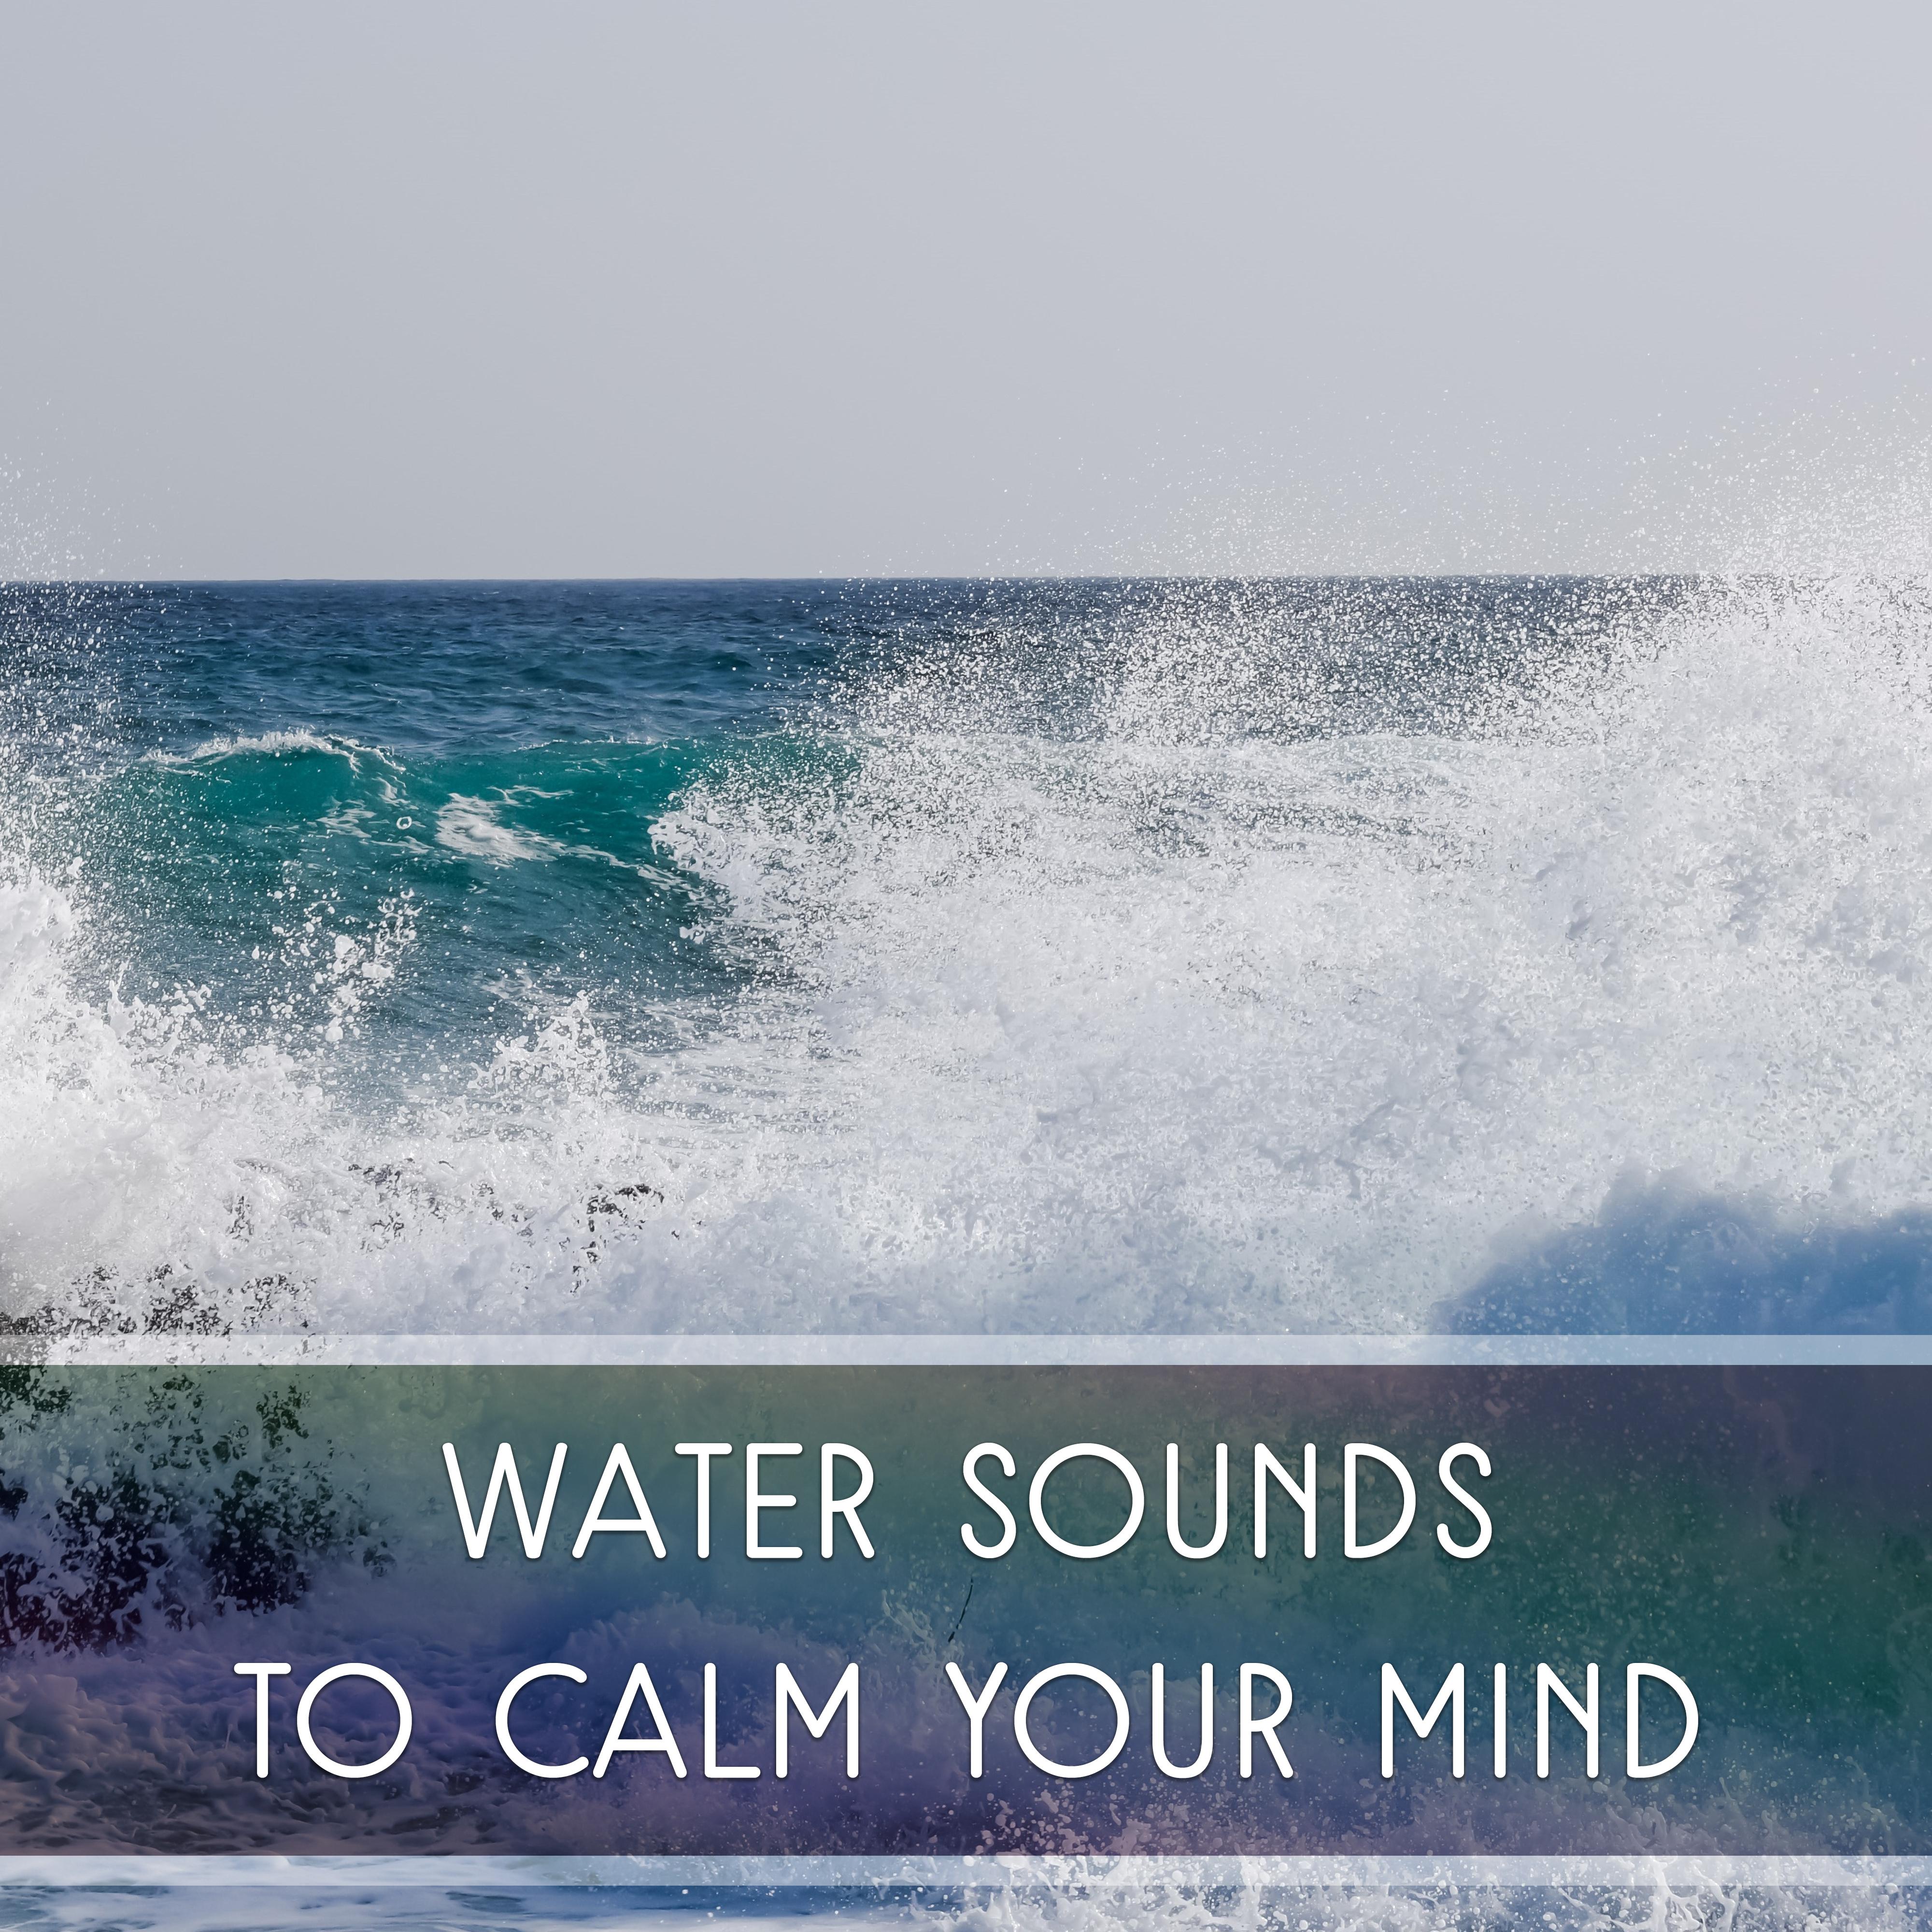 Water Sounds to Calm Your Mind  Easy Listening, New Age Relaxation, Sounds to Rest, Relaxing Music